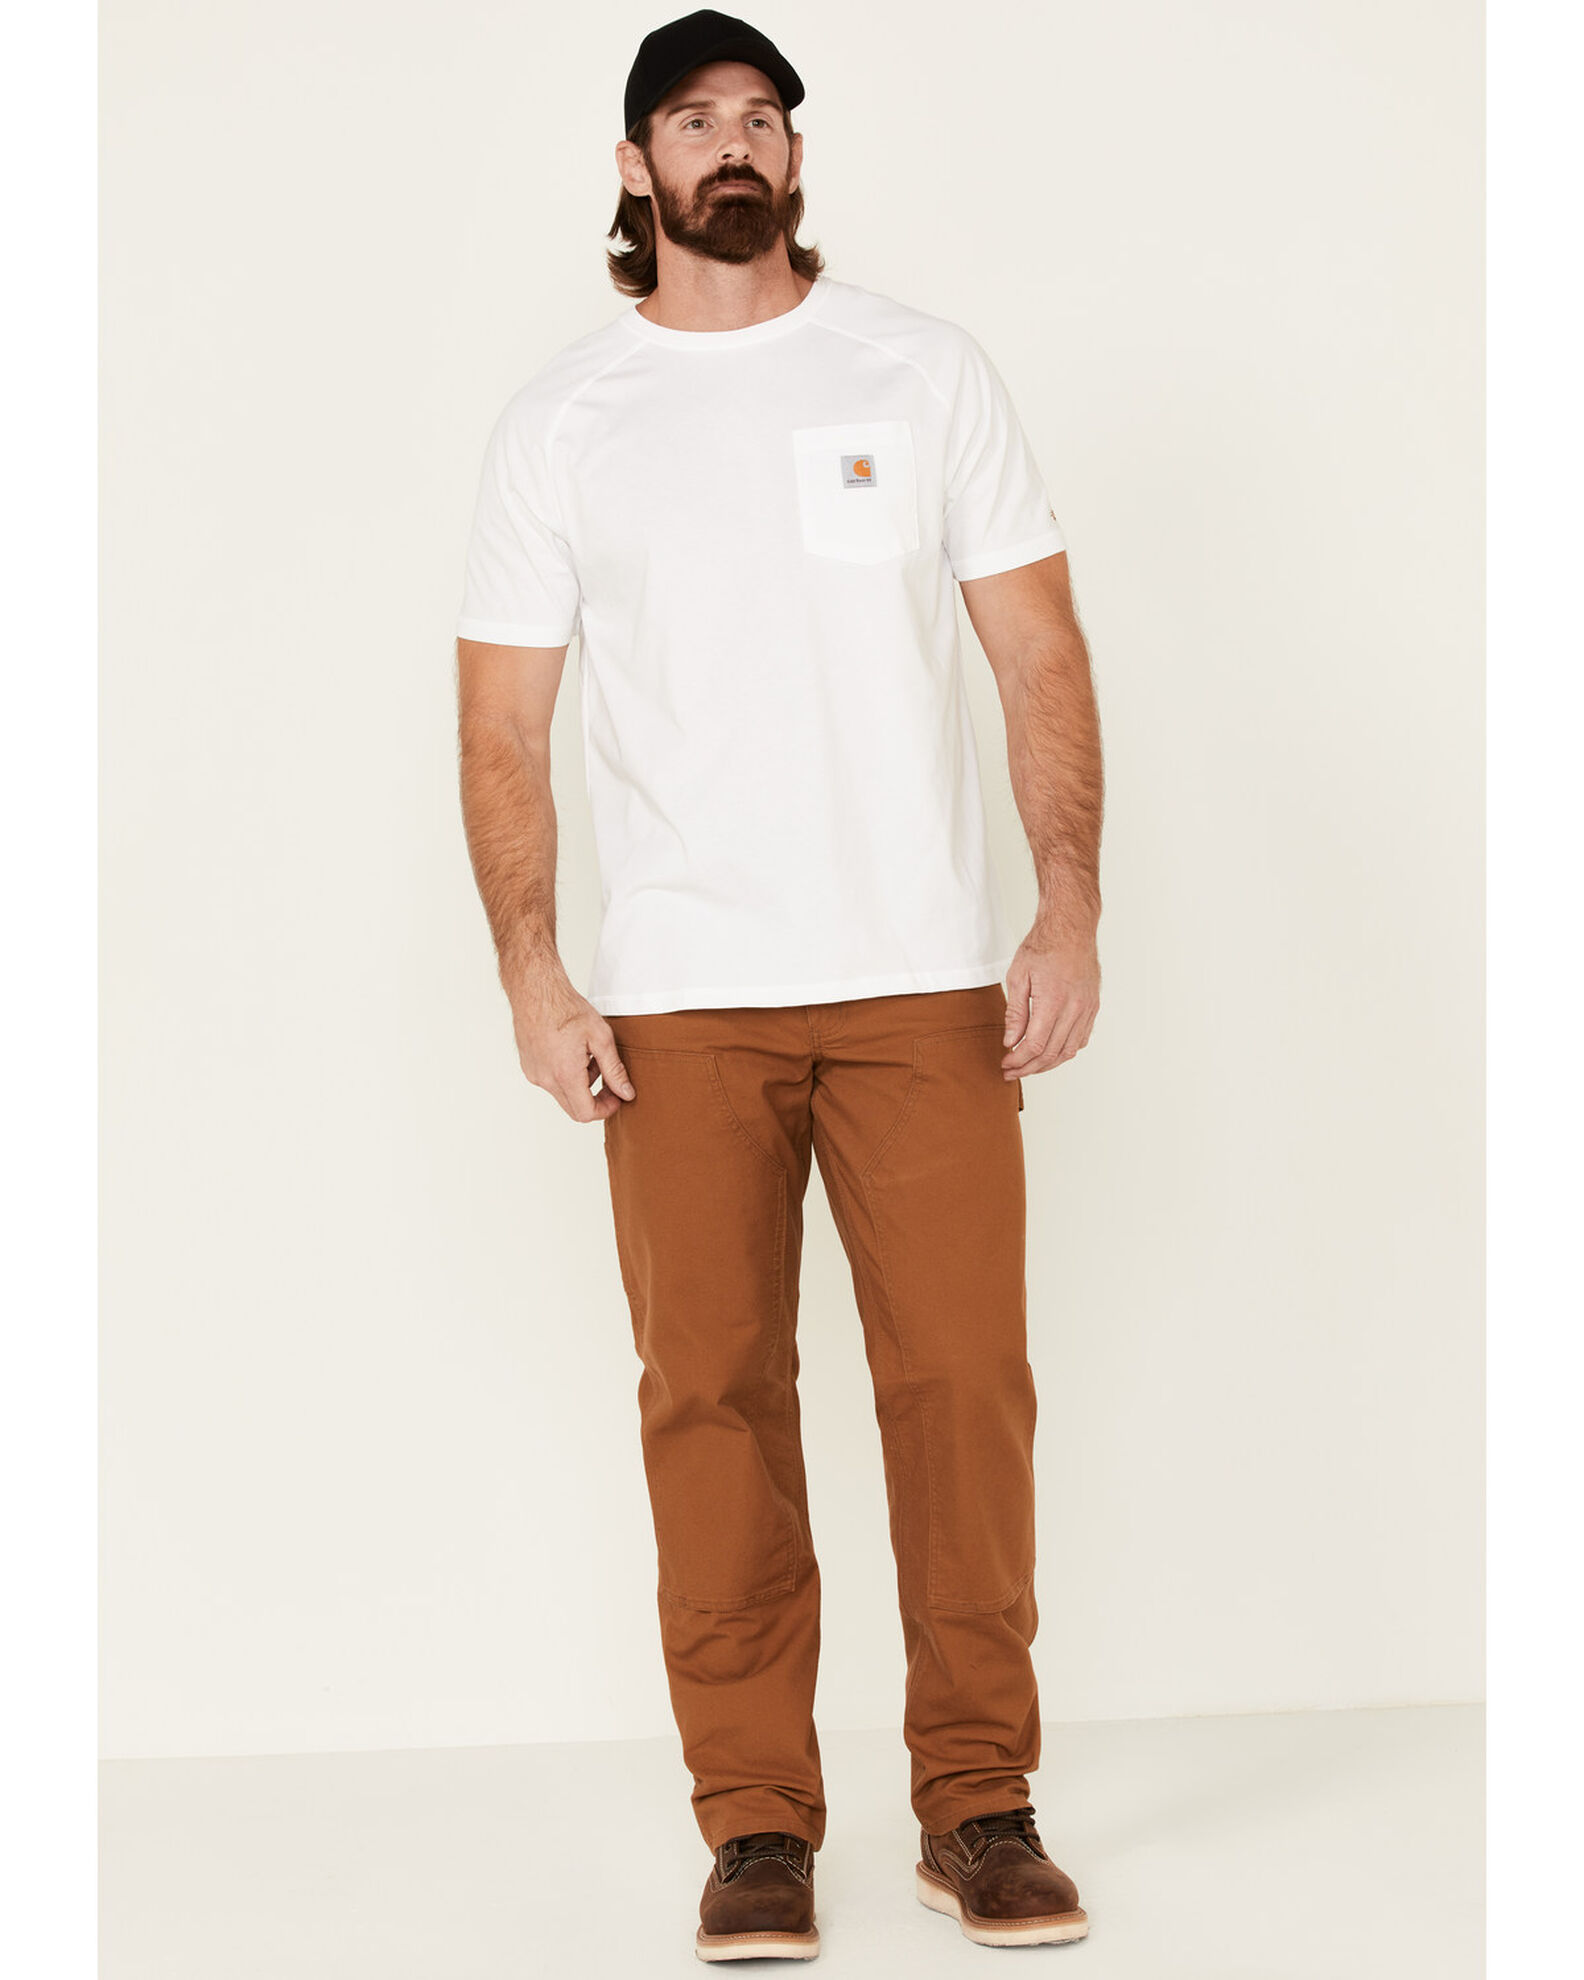 Carhartt Men's Rugged Flex Relaxed Fit Duck Double Front Work